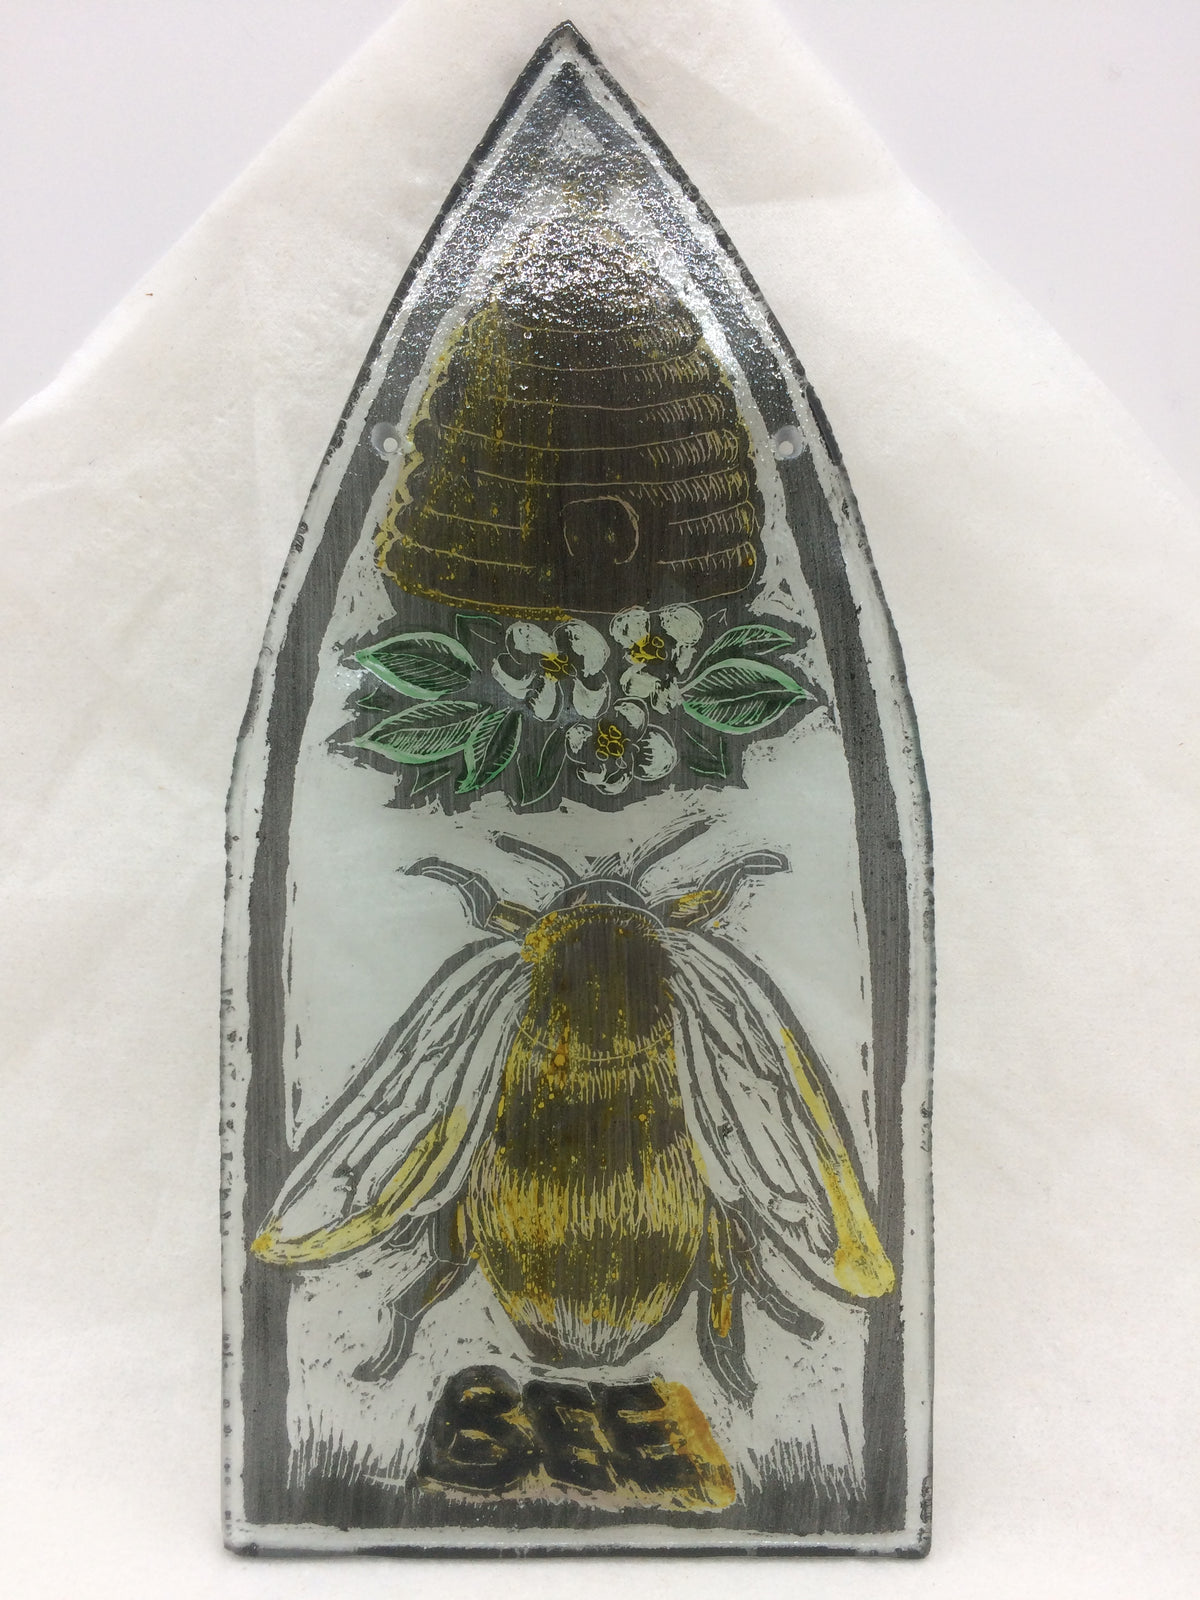 Bee and hive without frame, gothic shape, stained glass by Bryan Smith